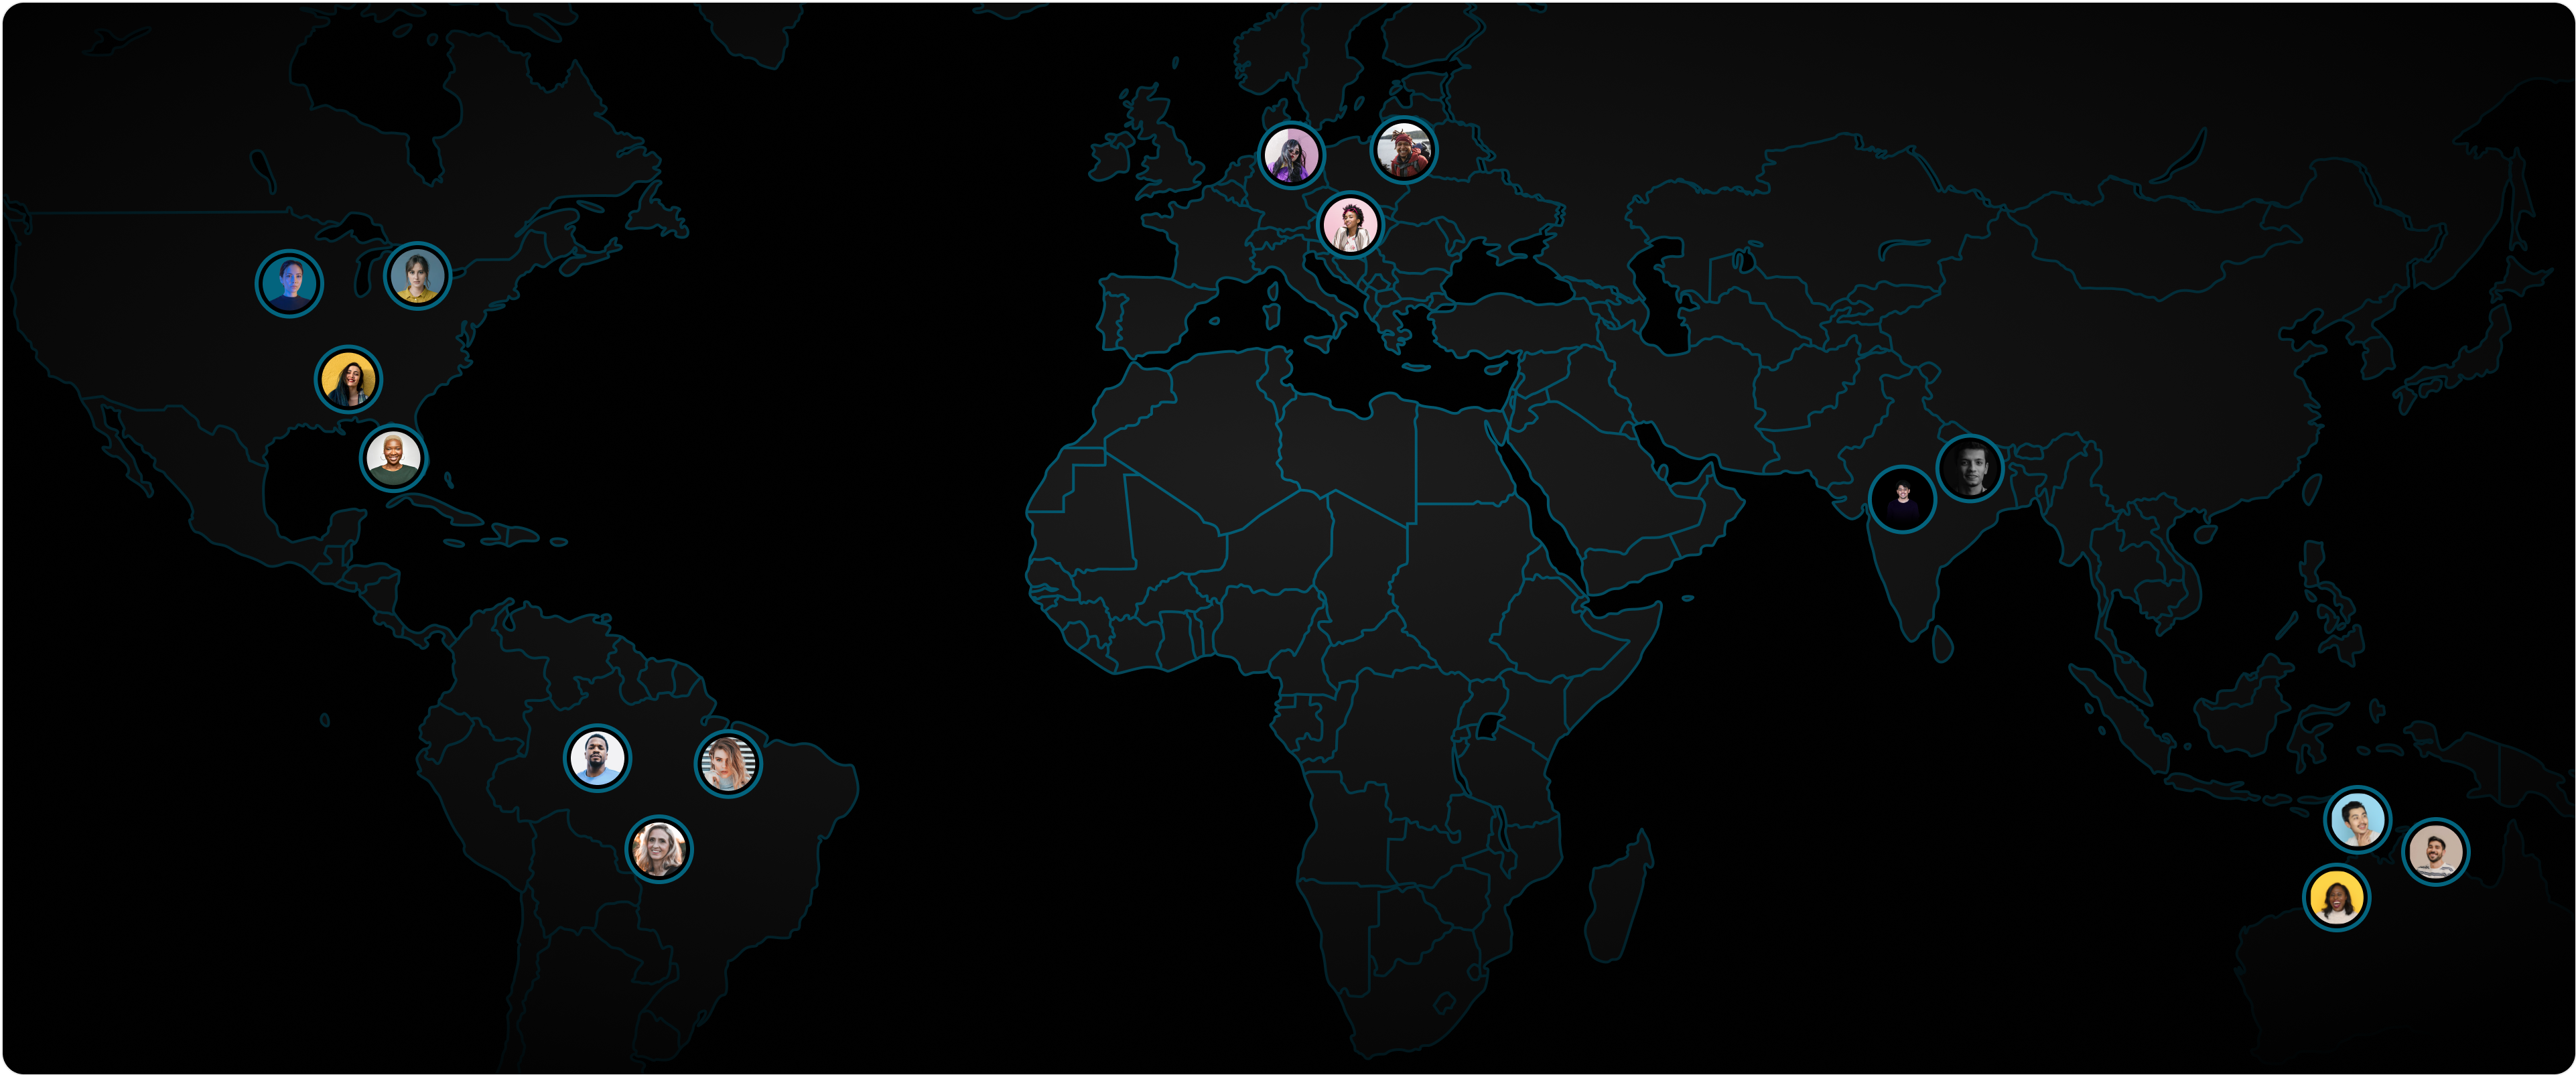 World map highlighting the geographic locations of team members in a global distribution, indicated by profile icons, representing the diverse and international nature of the team.